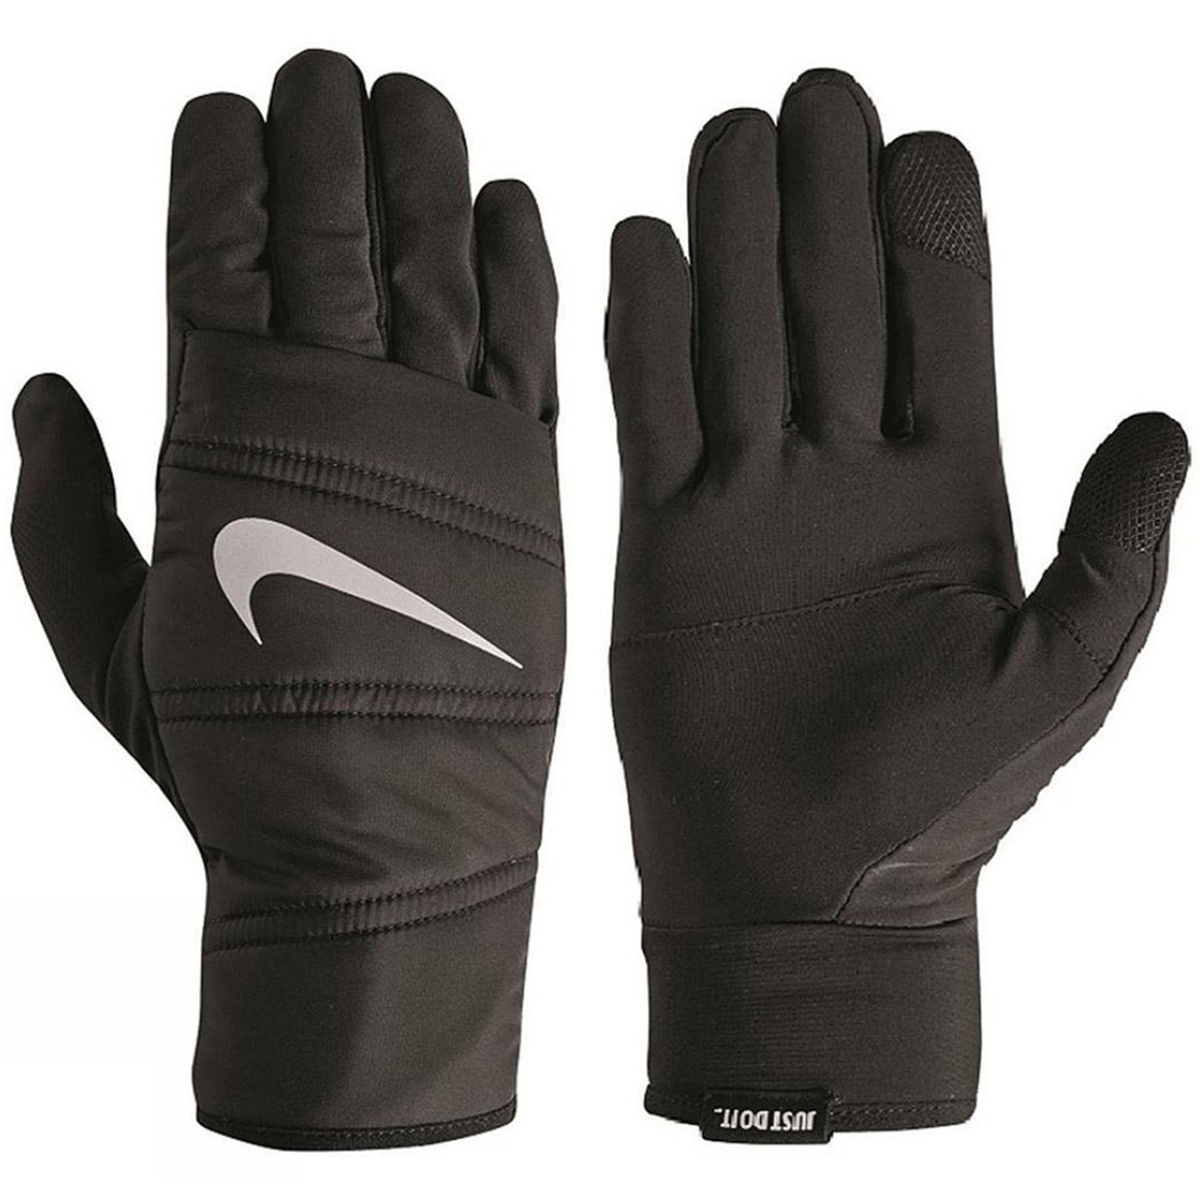 Nike MEN'S NIKE QUILTED RUN GLOVES L BLACK/SI 